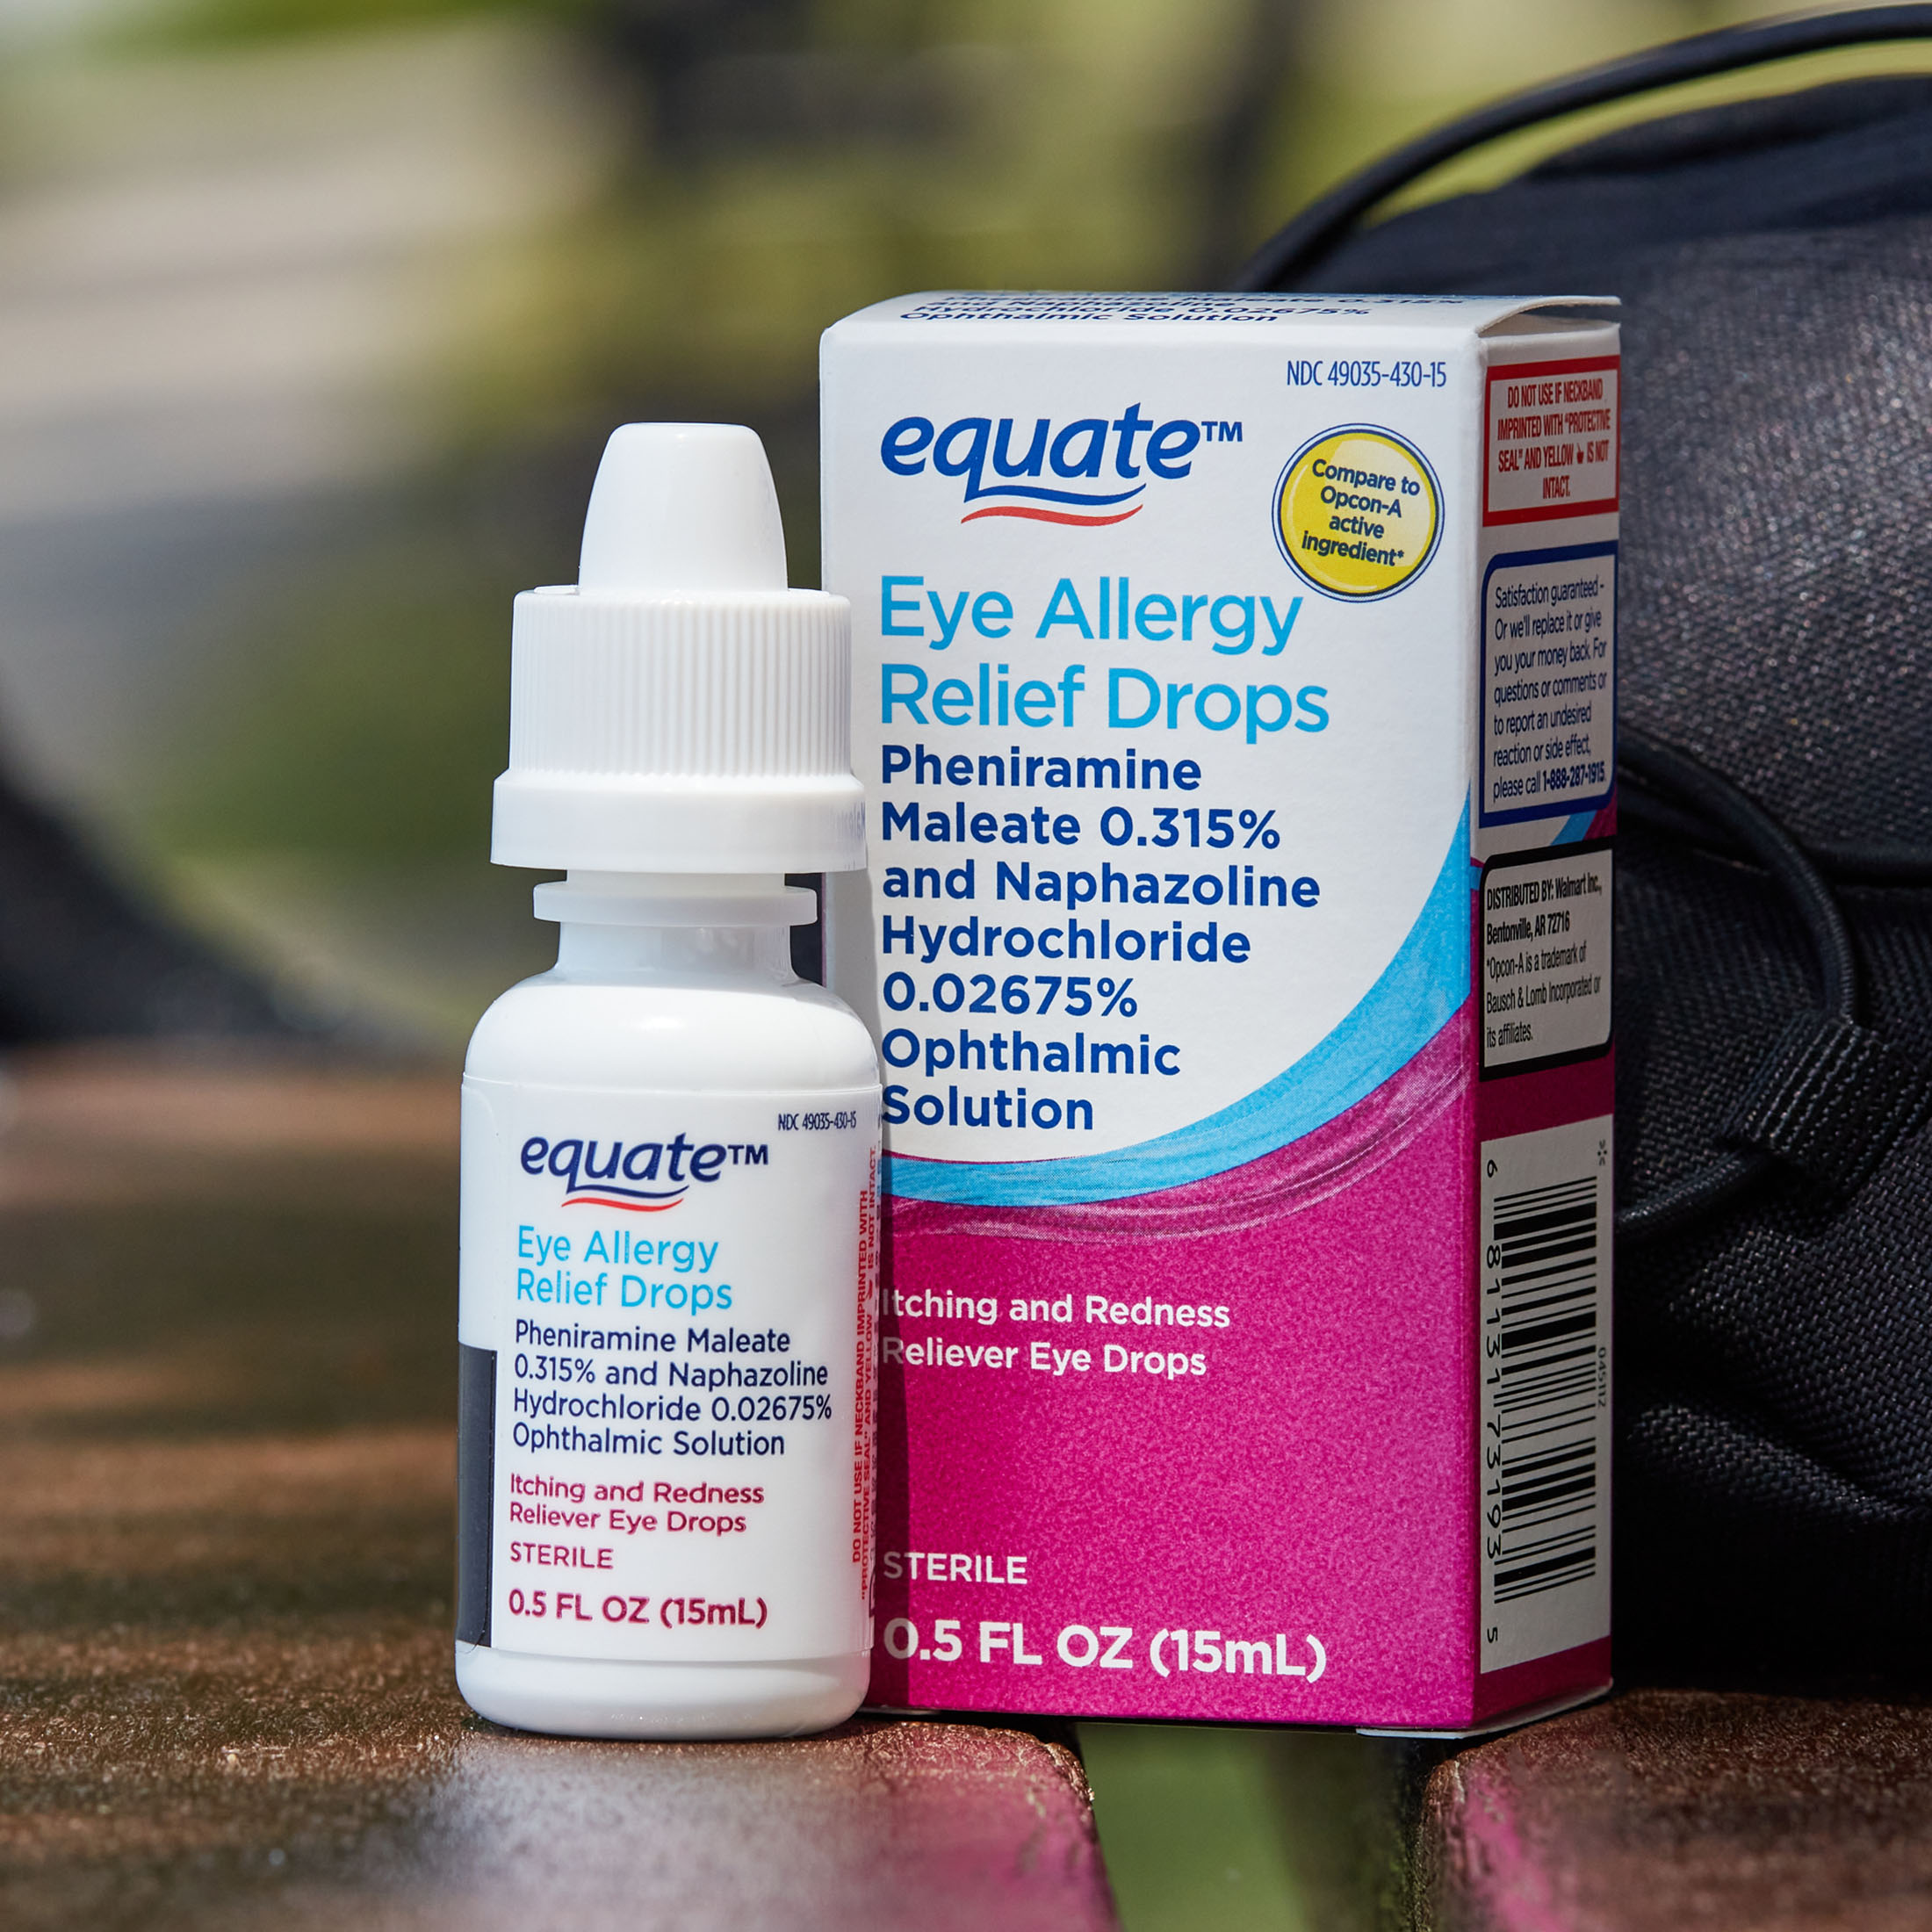 Equate Eye Allergy Relief Antihistamine and Redness Reliever Eye Drops, 0.5 oz - image 2 of 8